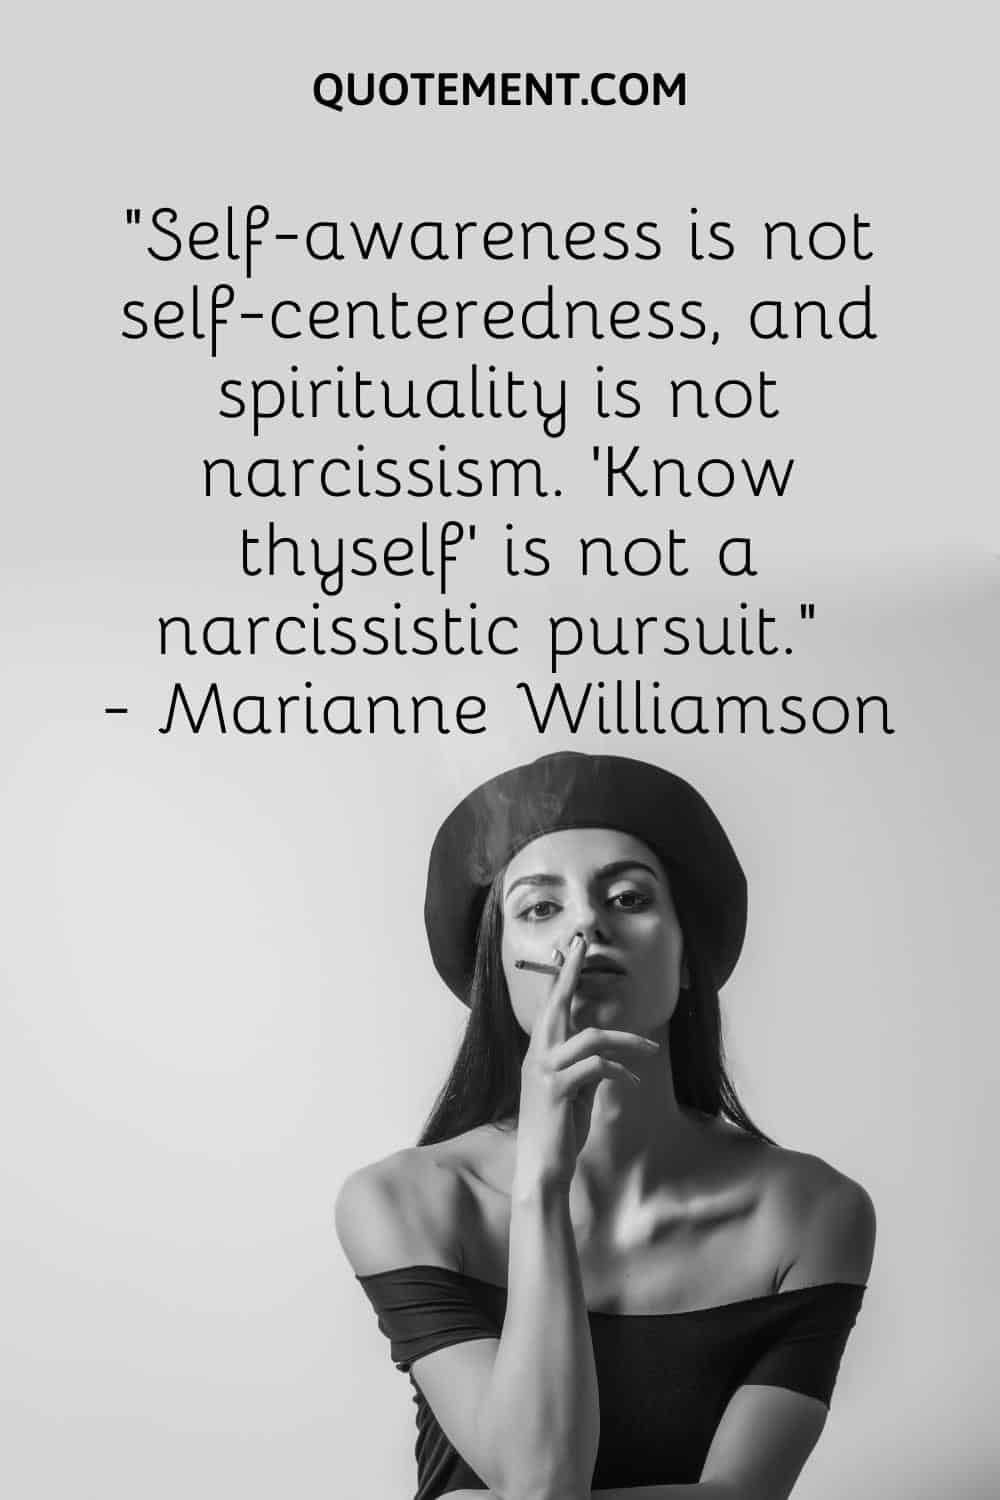 Self-awareness is not self-centeredness, and spirituality is not narcissism